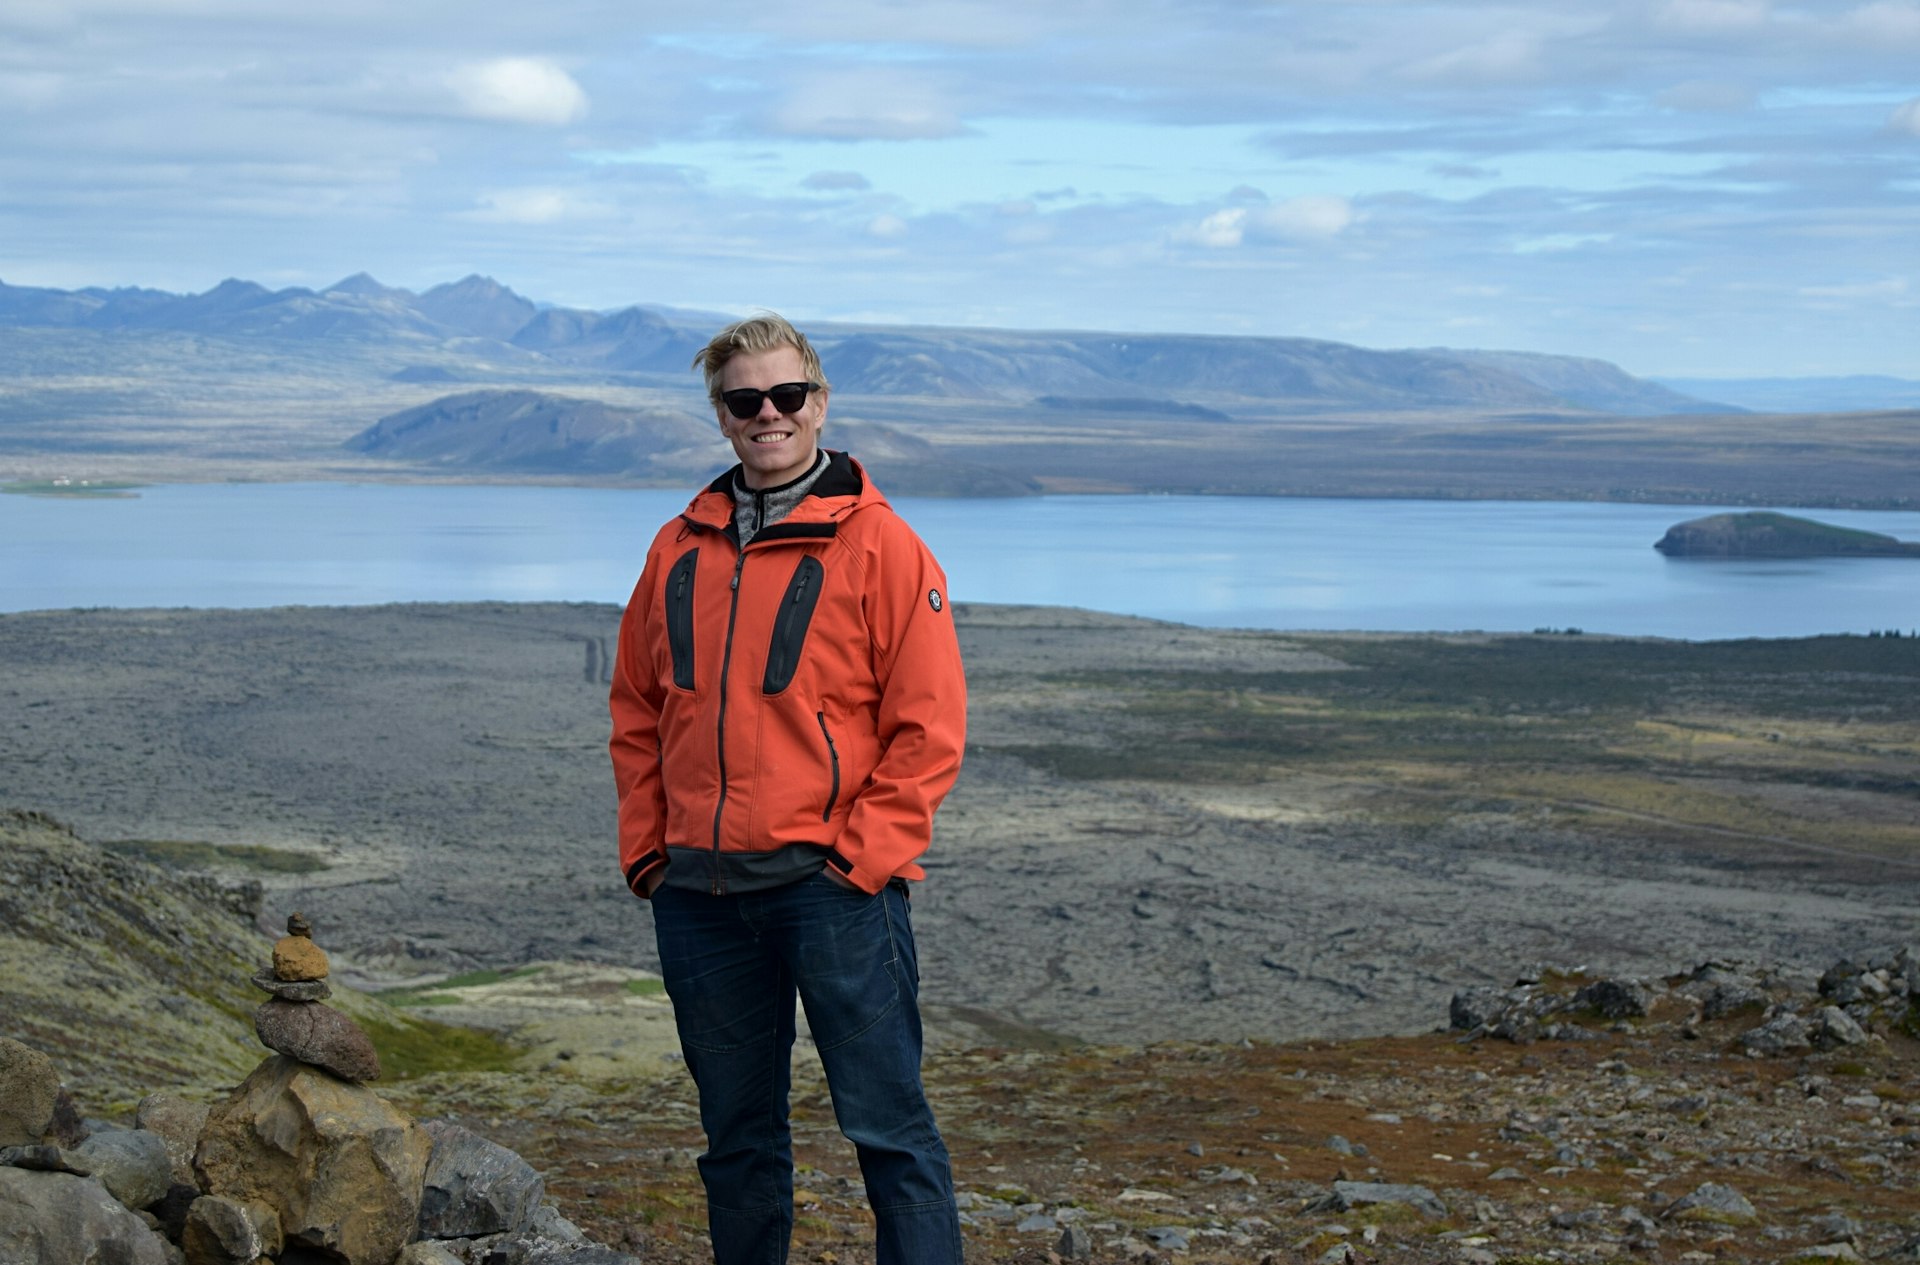 Local expert Gunnar Þór Pálsson smiles for the camera with the Icelandic landscape behind him